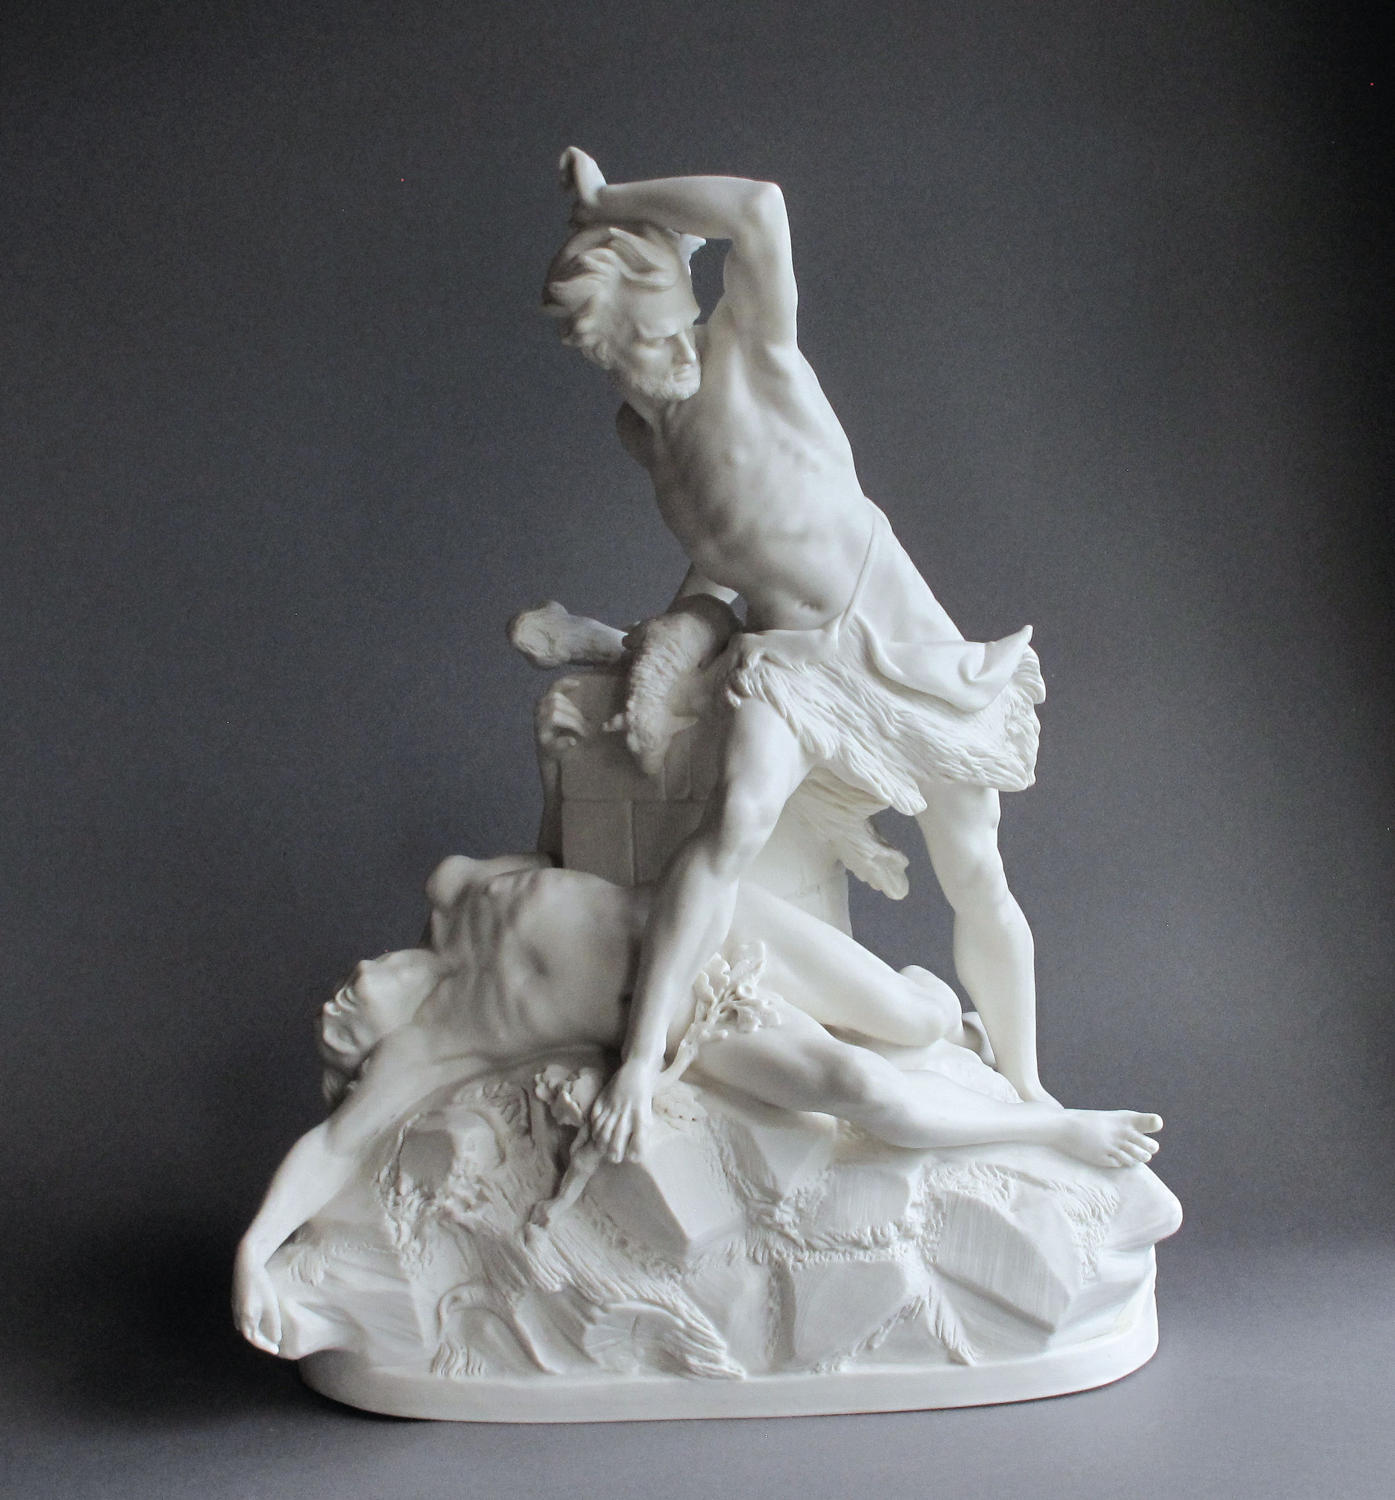 A dramatic Minton Parian figure group of Cain & Abel